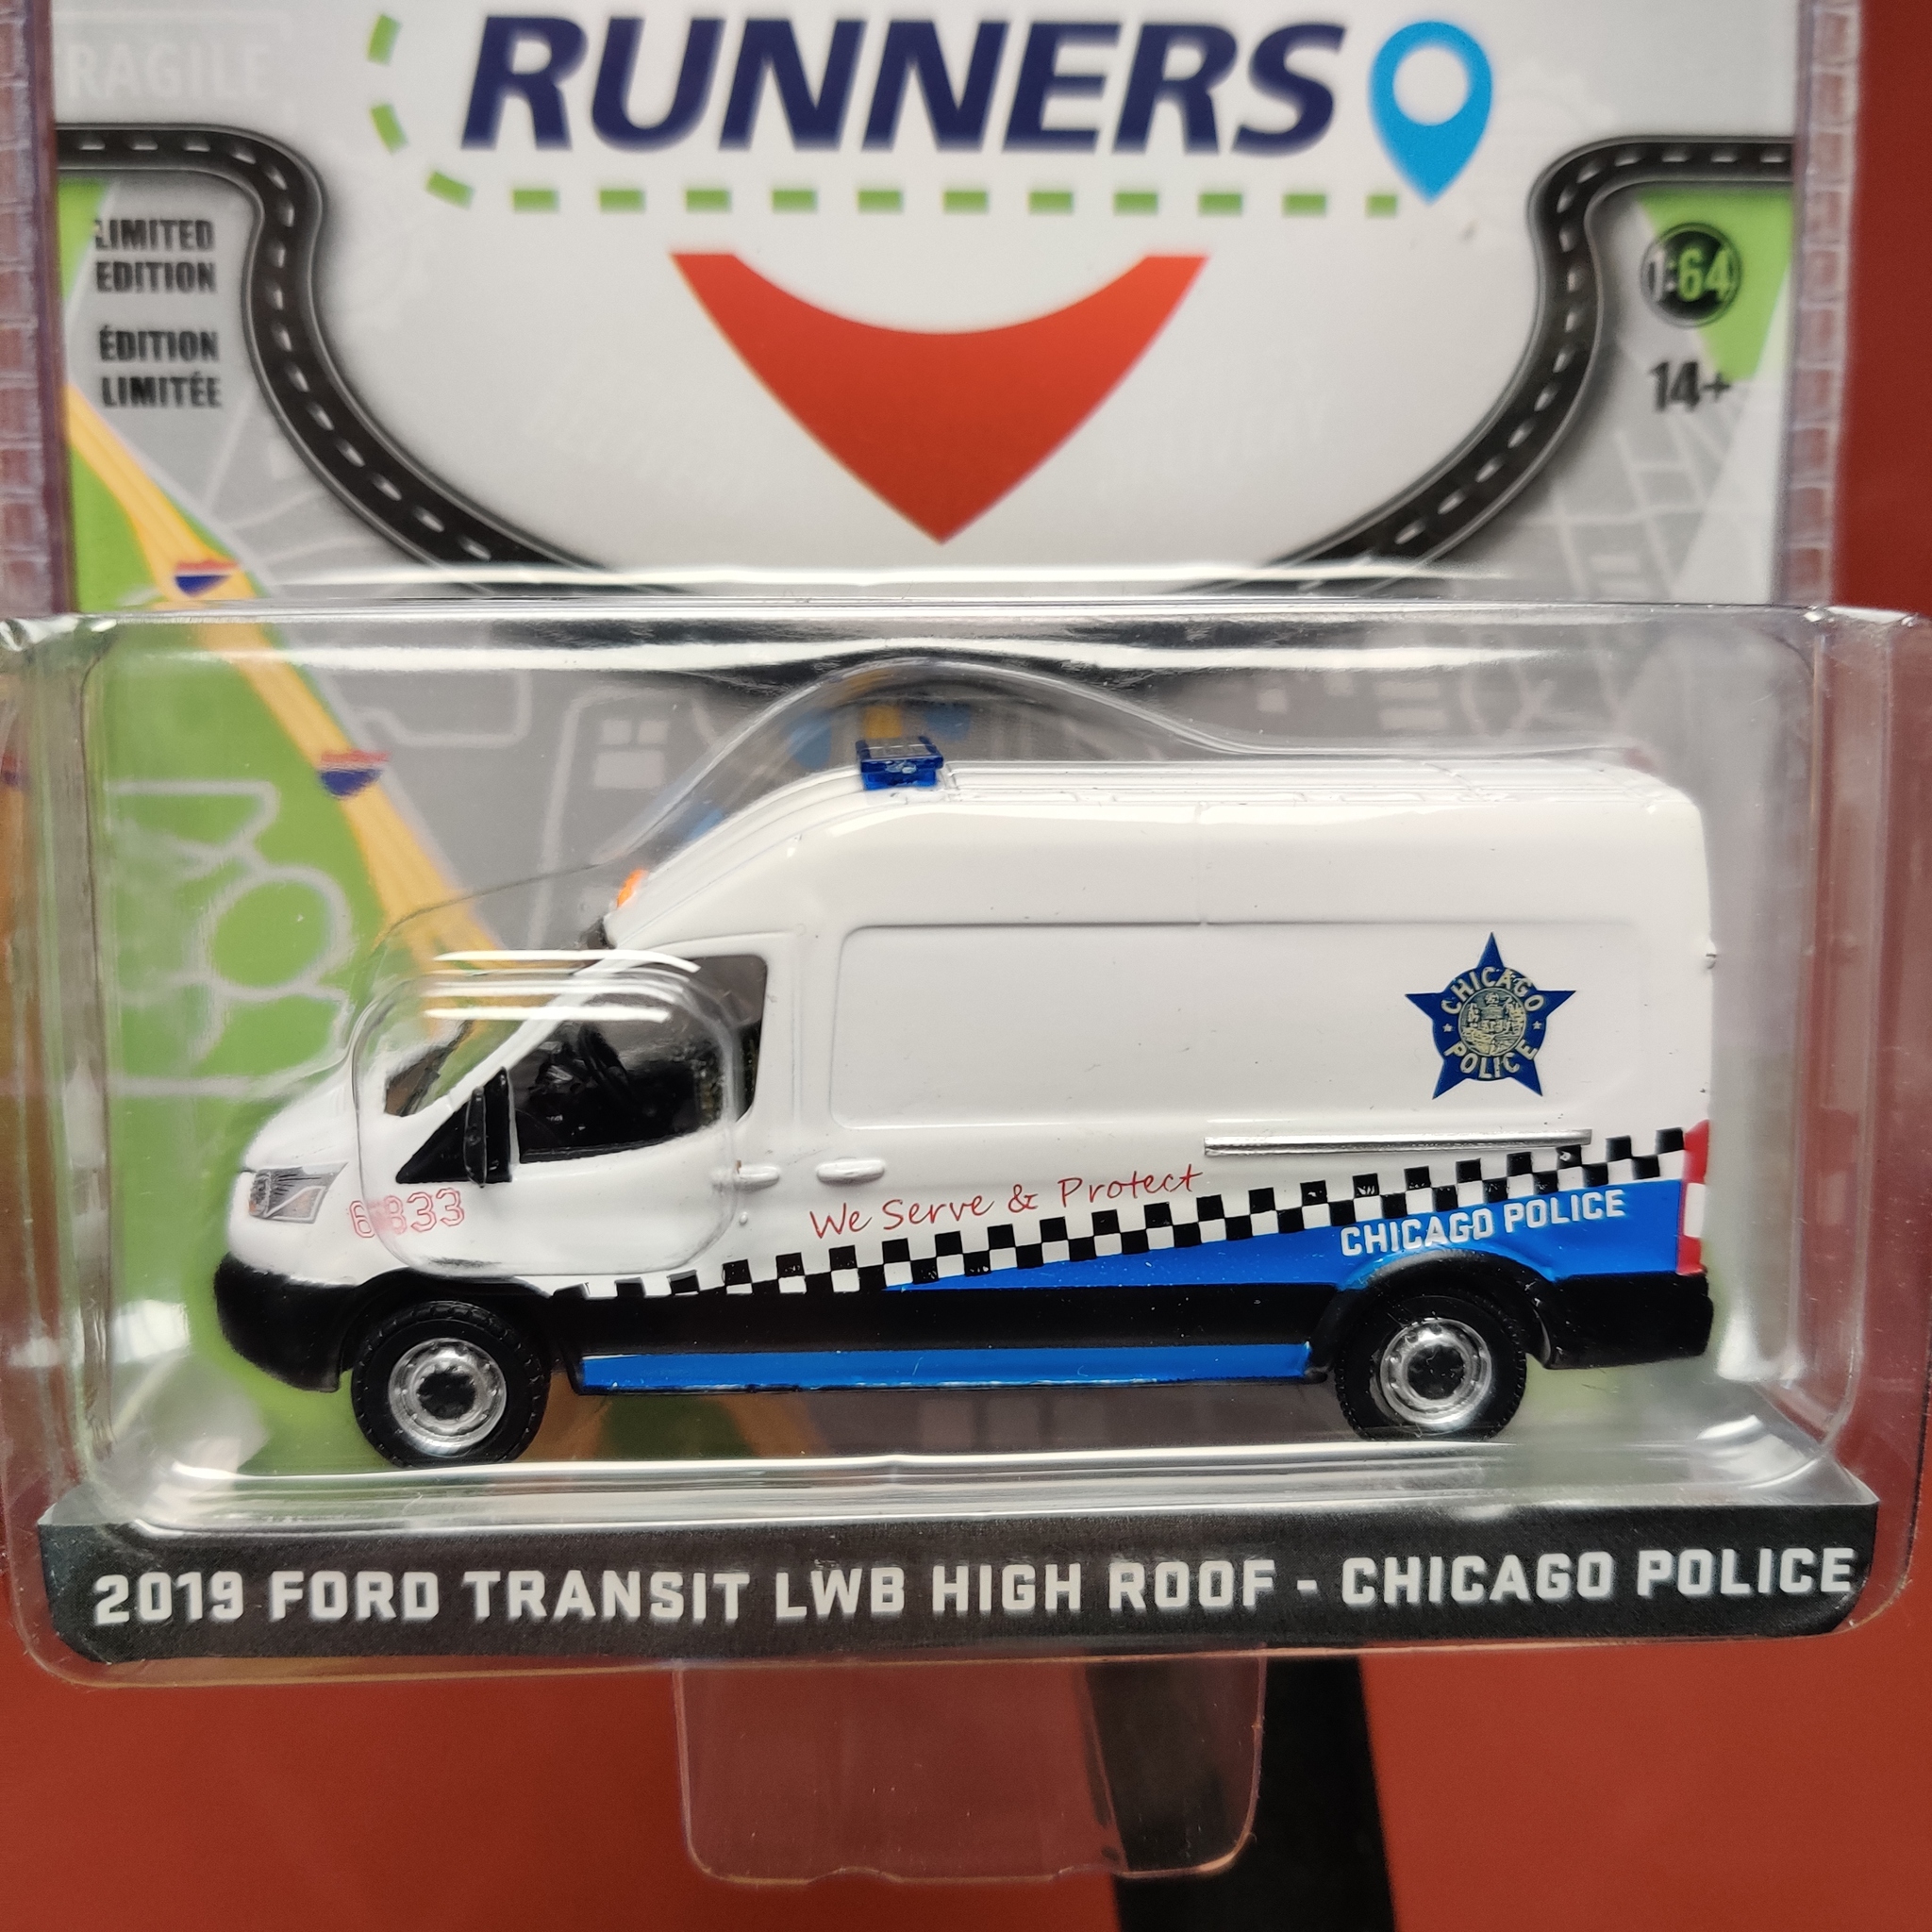 Skala 1/64 "Route Runners" - 2019 Ford Transit LWB High Roof "Chicago Police", fr Greenlight